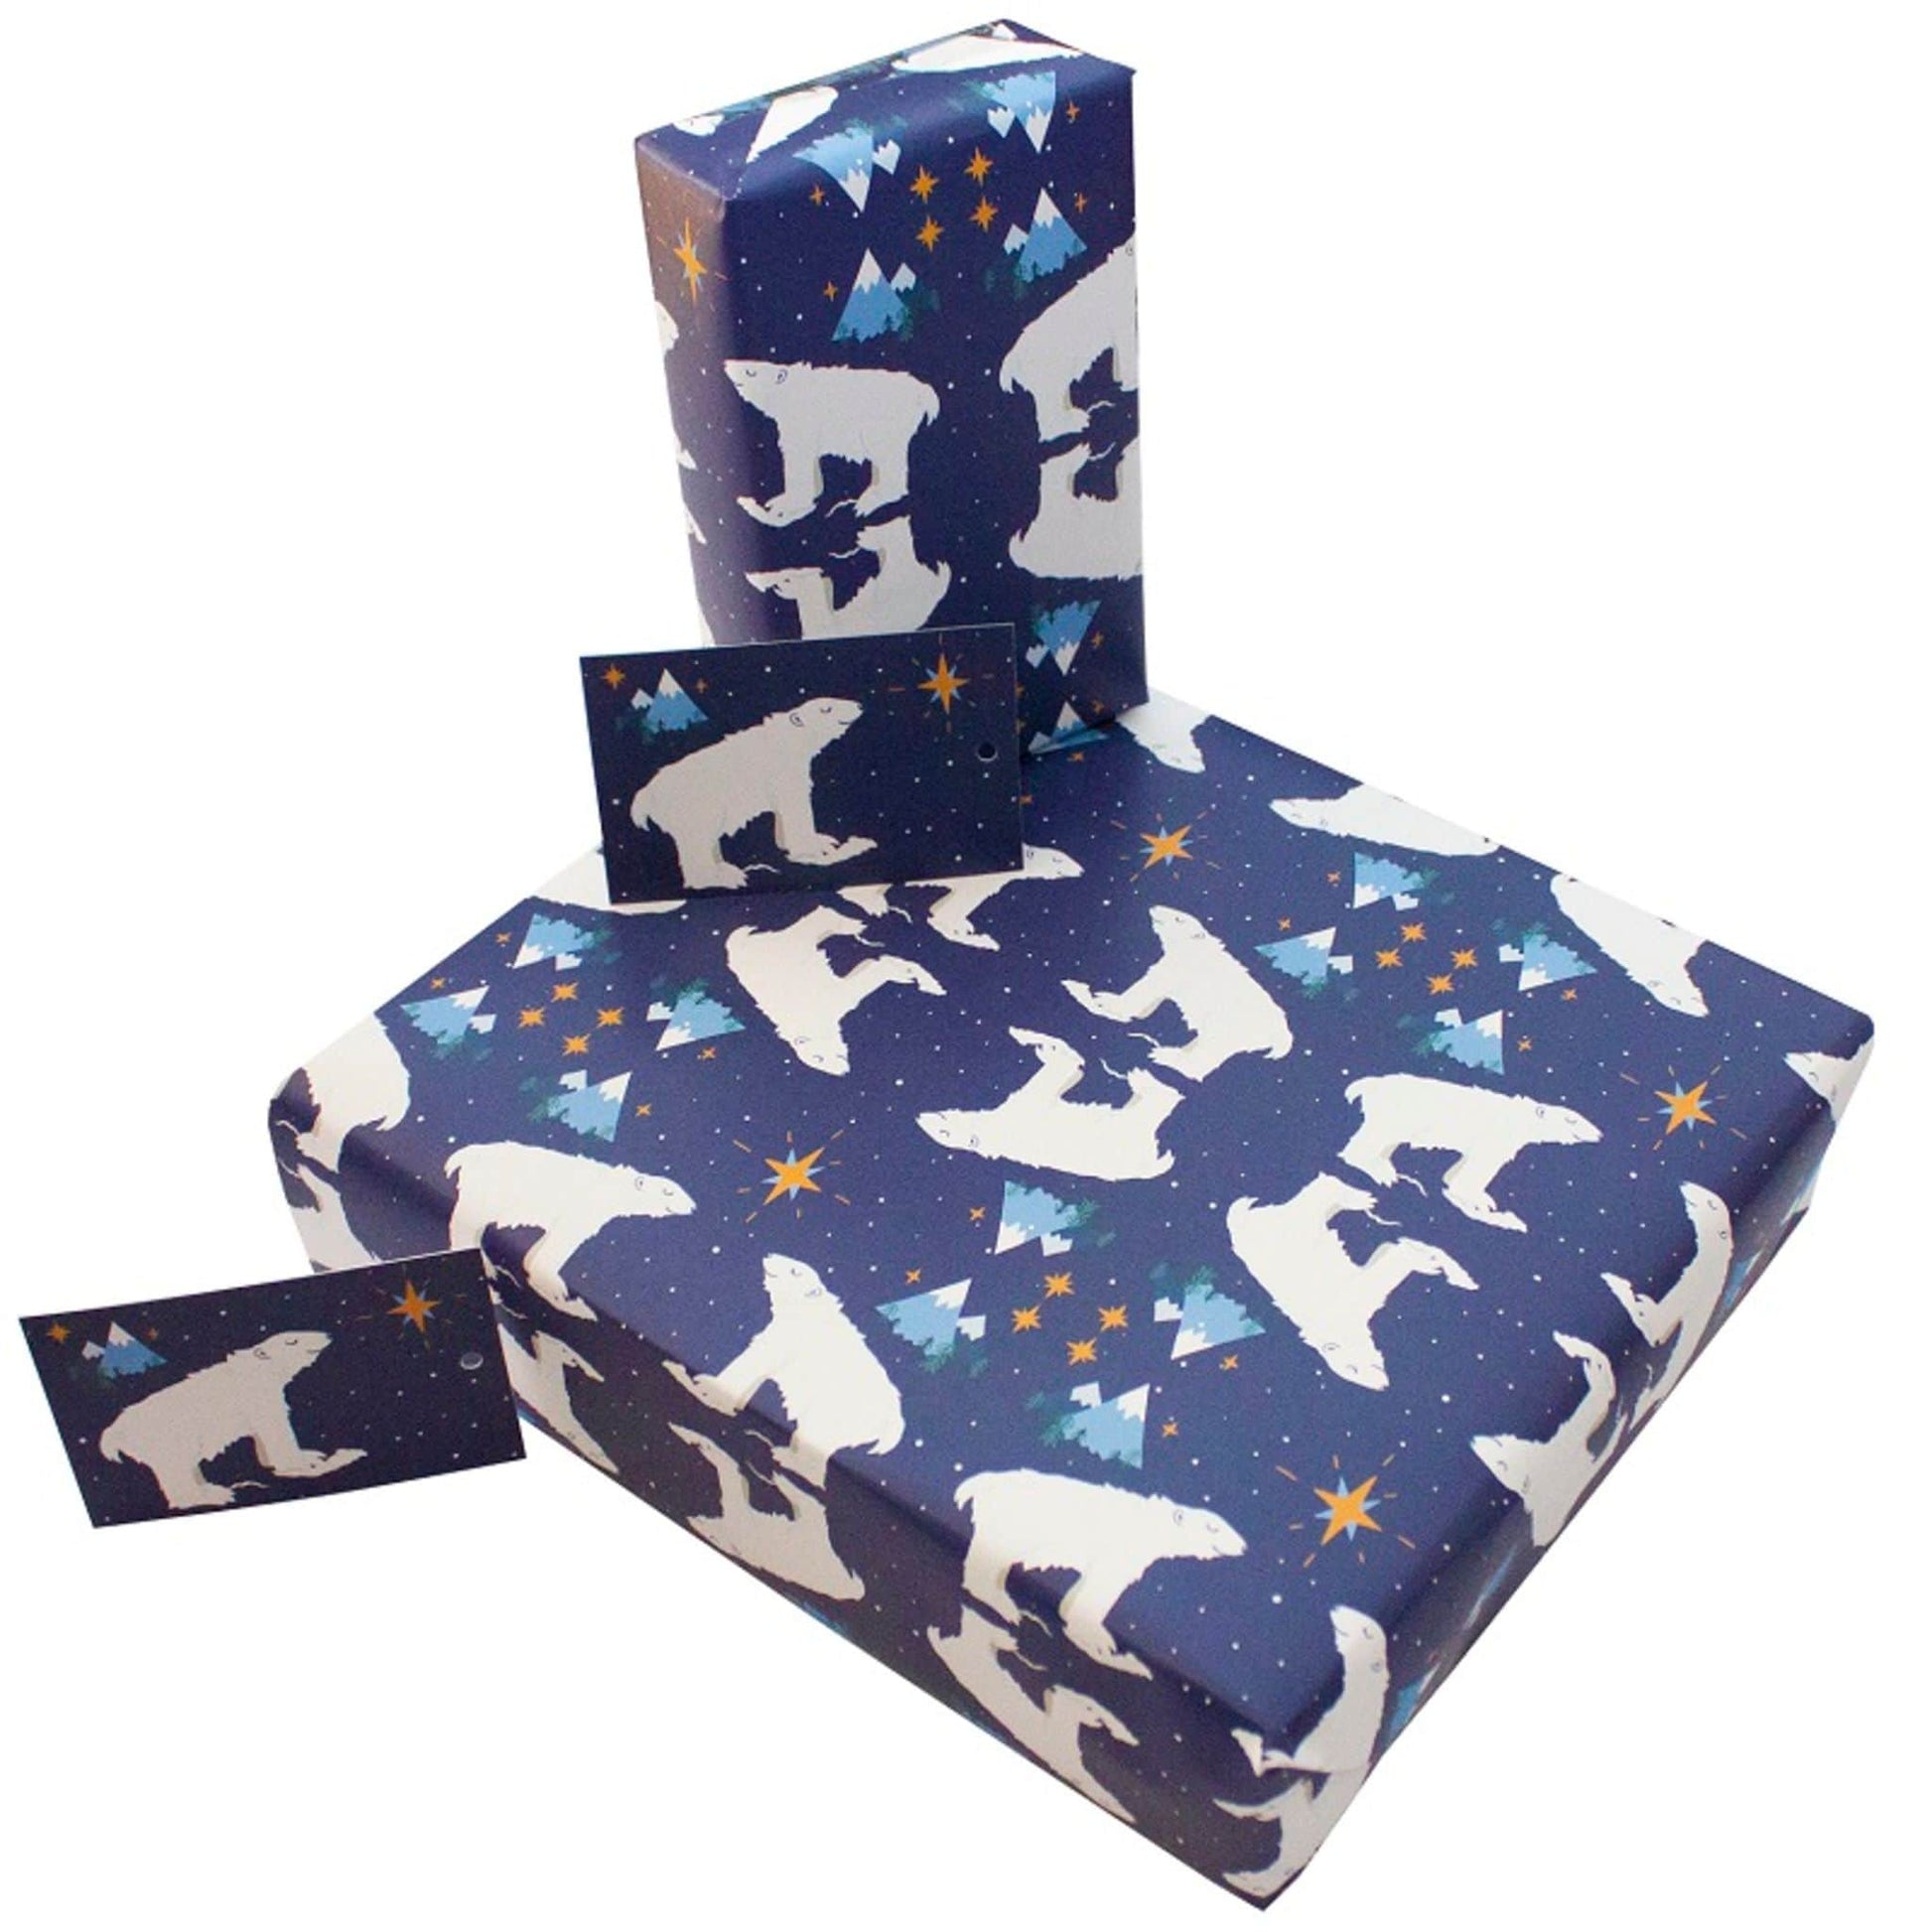 Recycled Christmas eco wrapping paper - polar bears